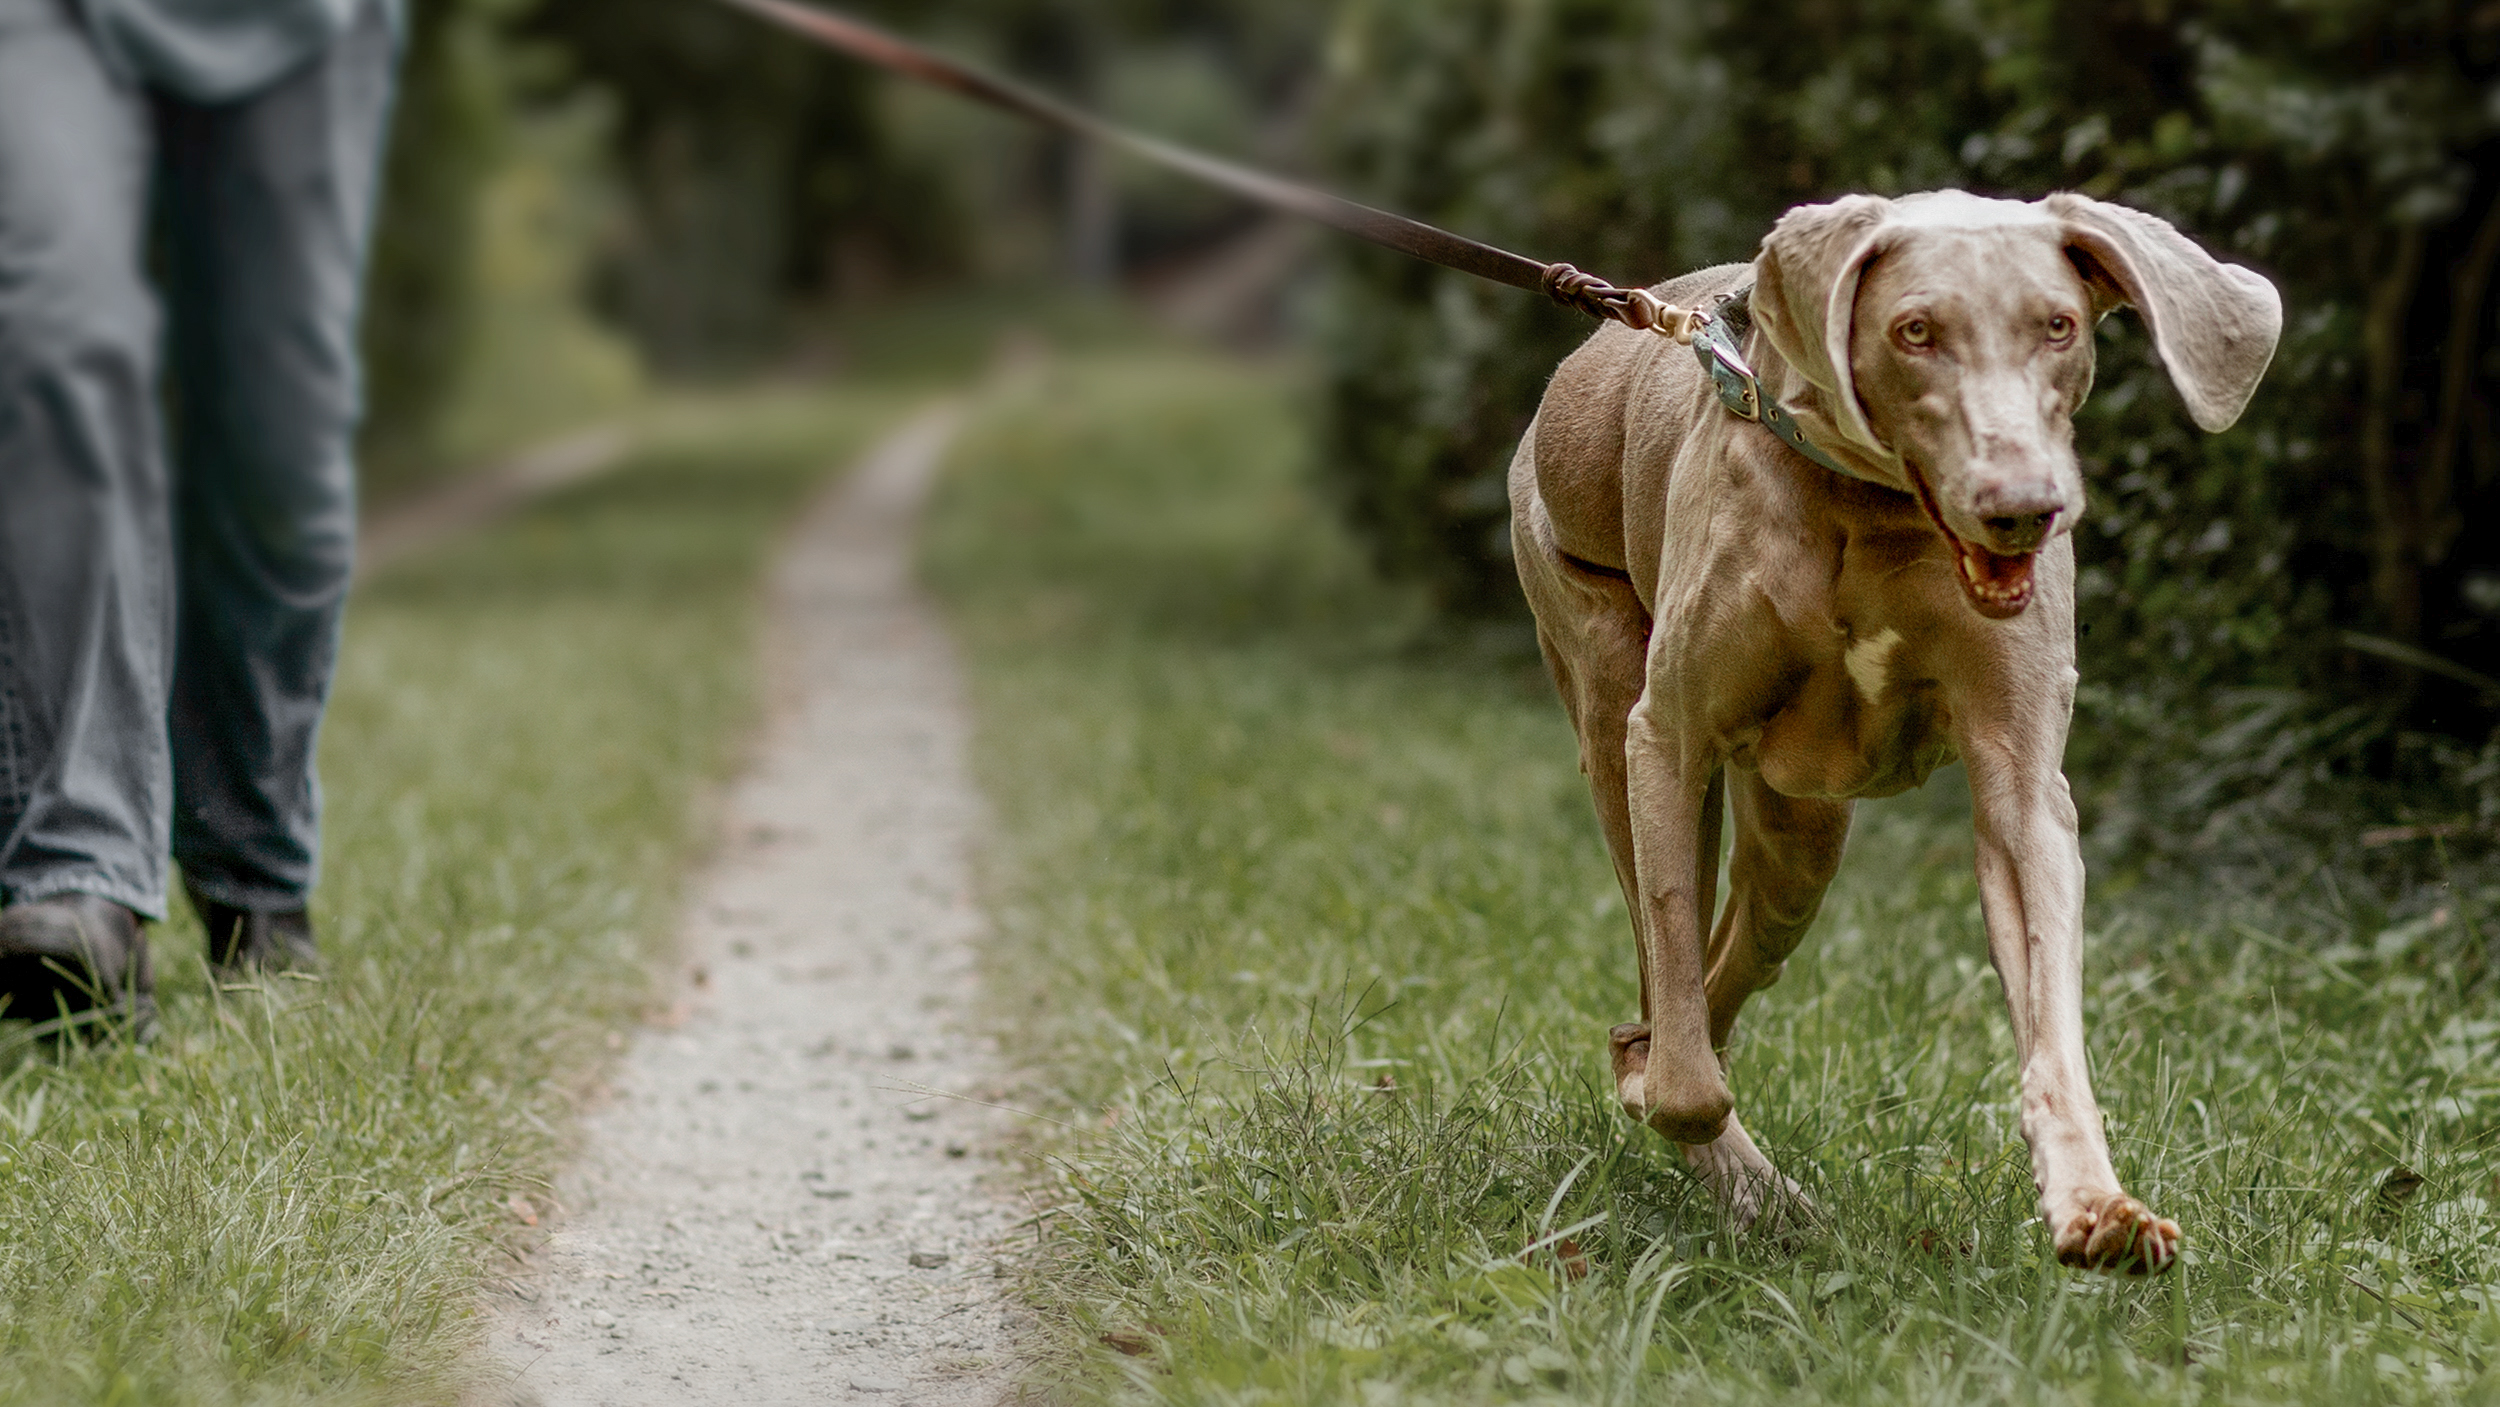 Aging Weimaraner walking outdoors on a grassy footpath.